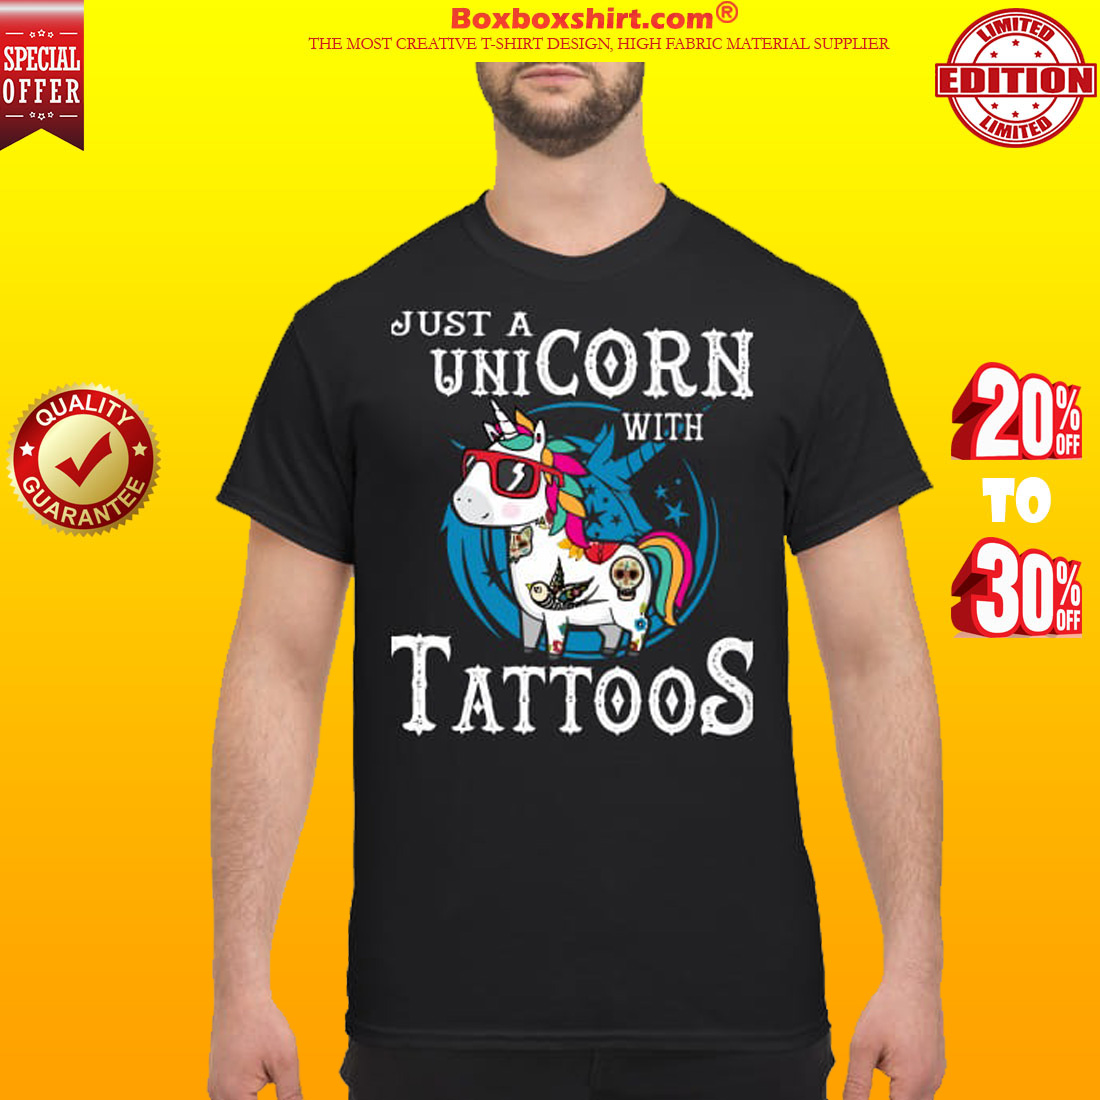 Just a unicorn with tattoos classic shirt